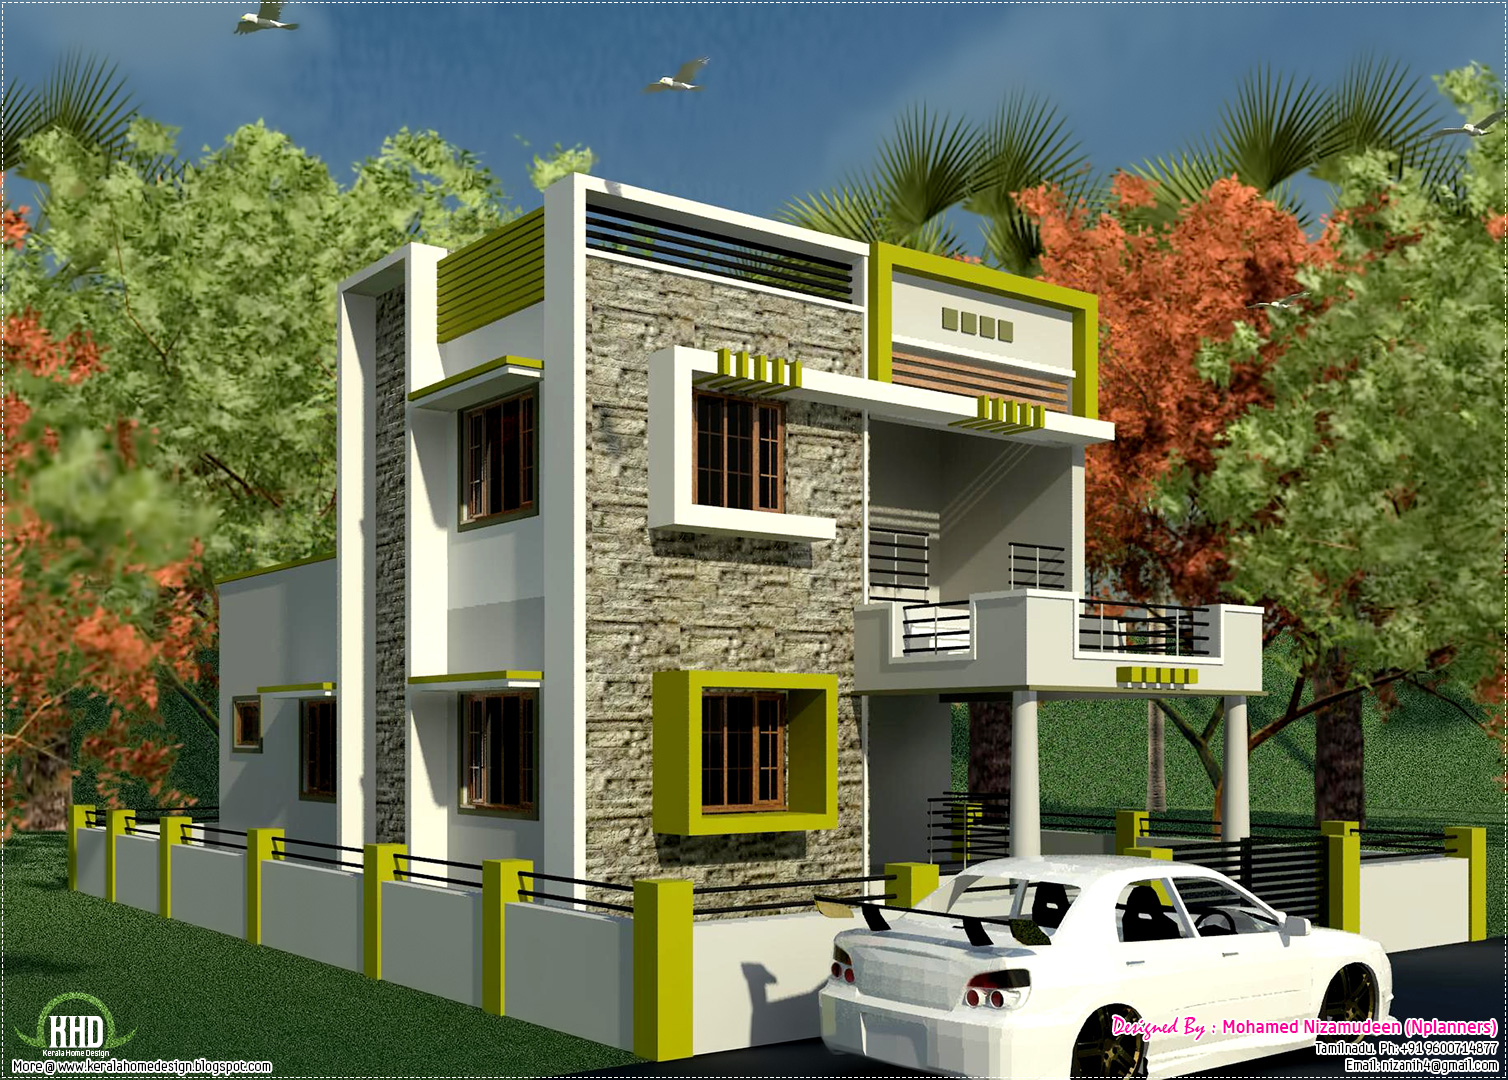 South Indian  style  new modern 1460 sq feet house  design  Kerala home  design  and floor plans  